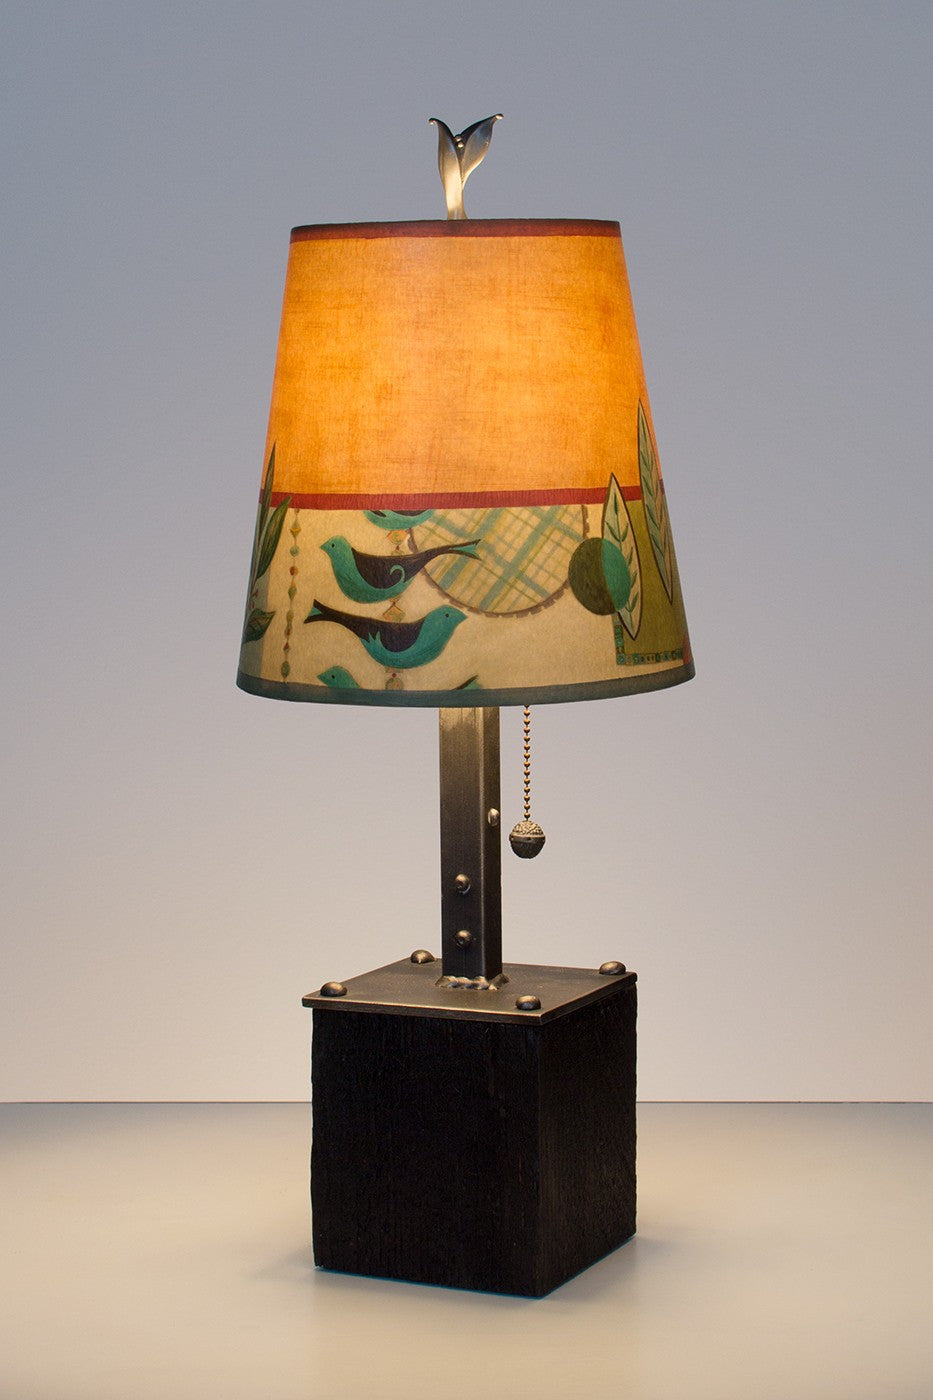 Steel Table Lamp on Wood with Small Drum Shade in New Capri Spice - True North Gallery